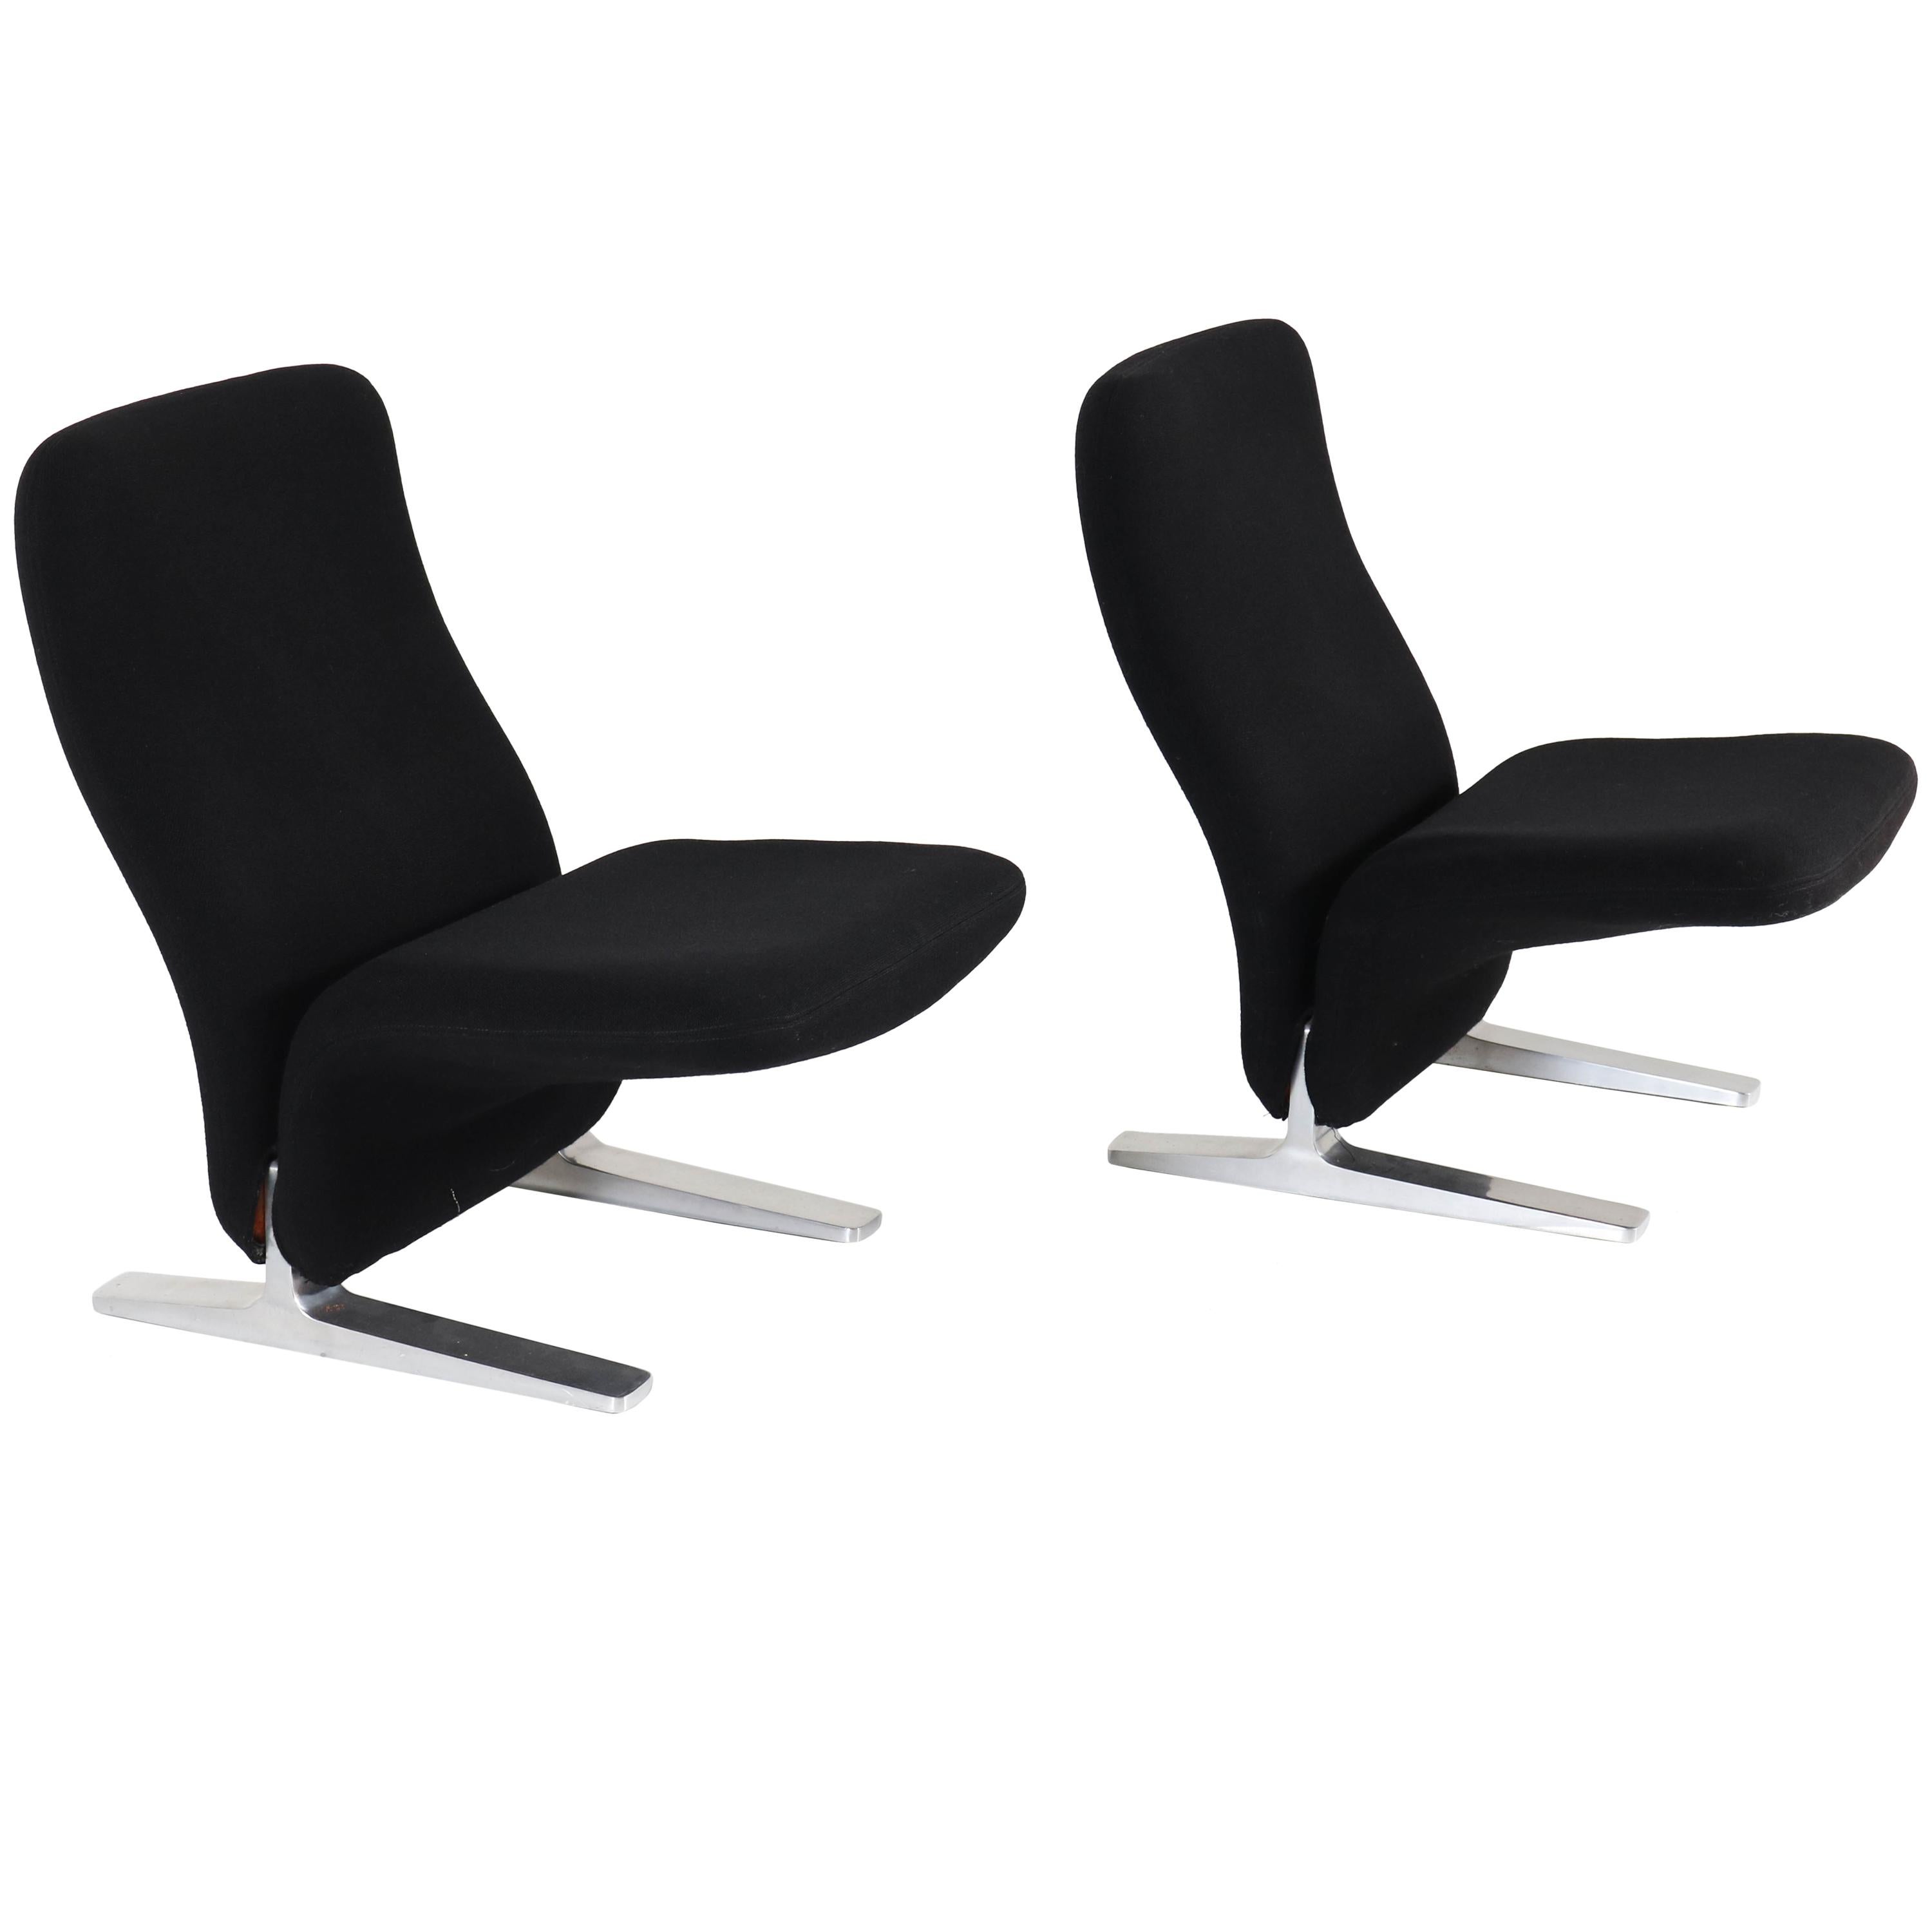 Pair of "Concorde" Model F780 Lounge Chairs by Pierre Paulin for Artifort, 1970s